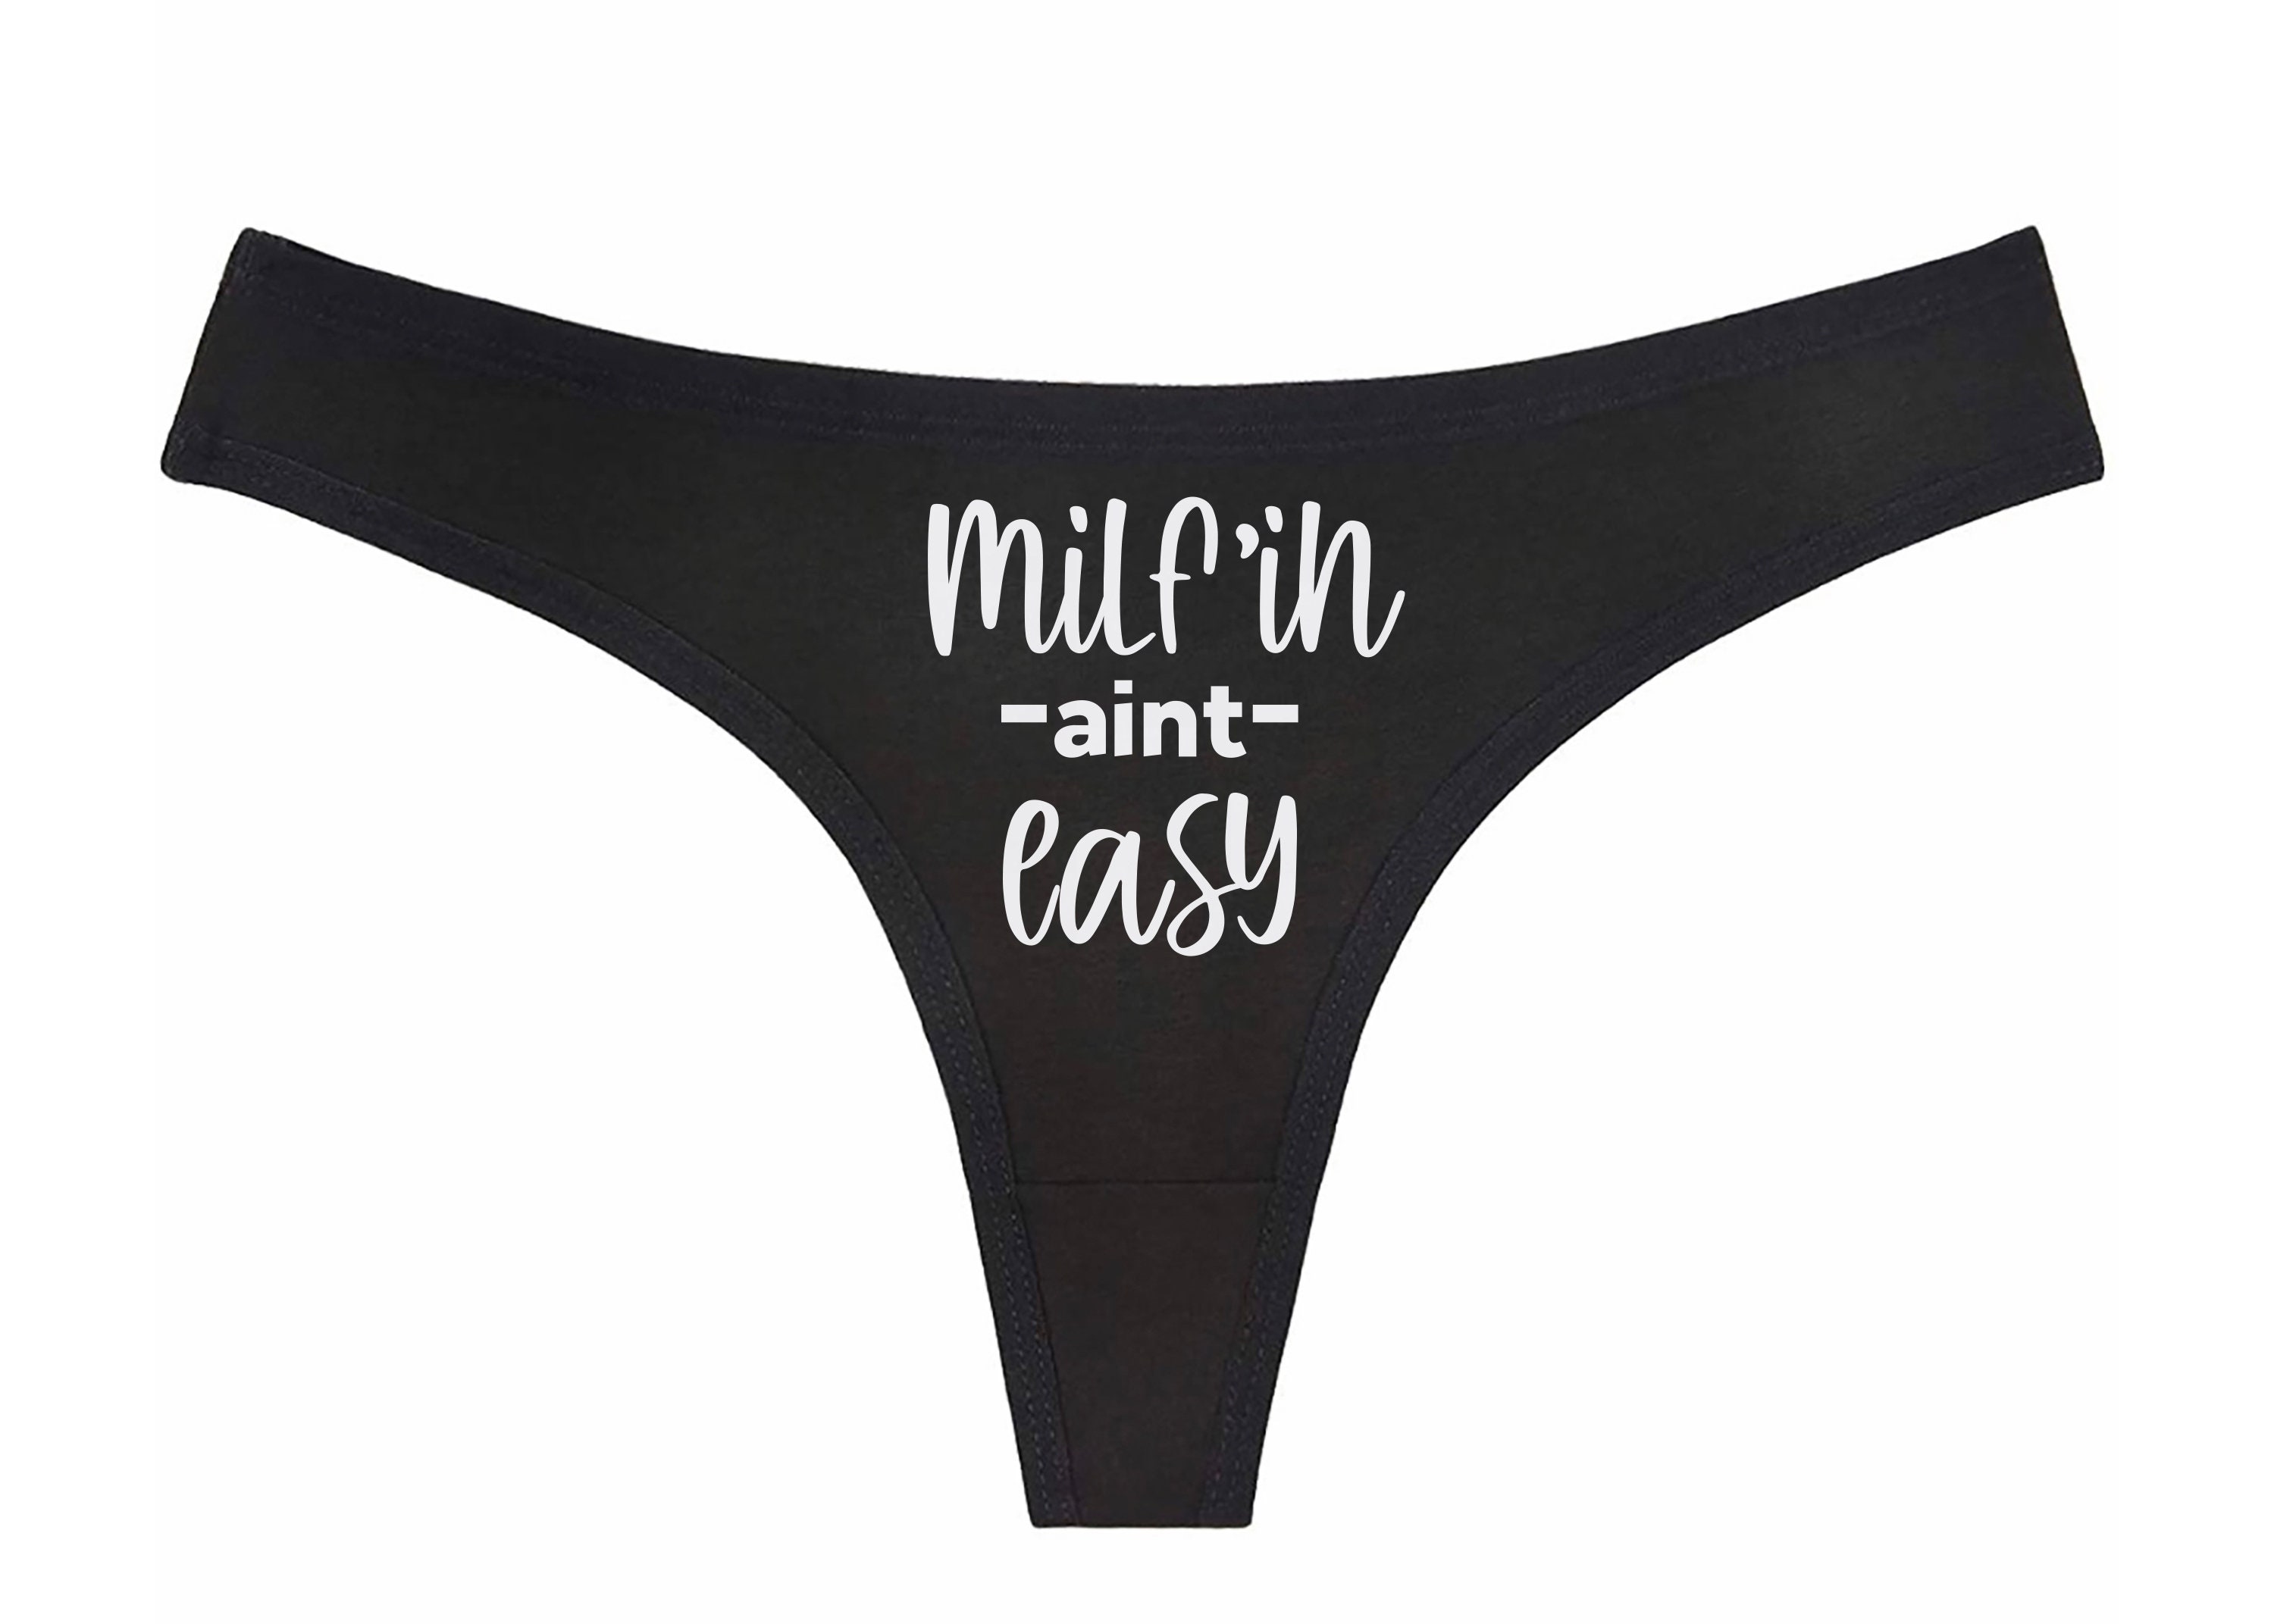 Things To Do Thong -Personalized